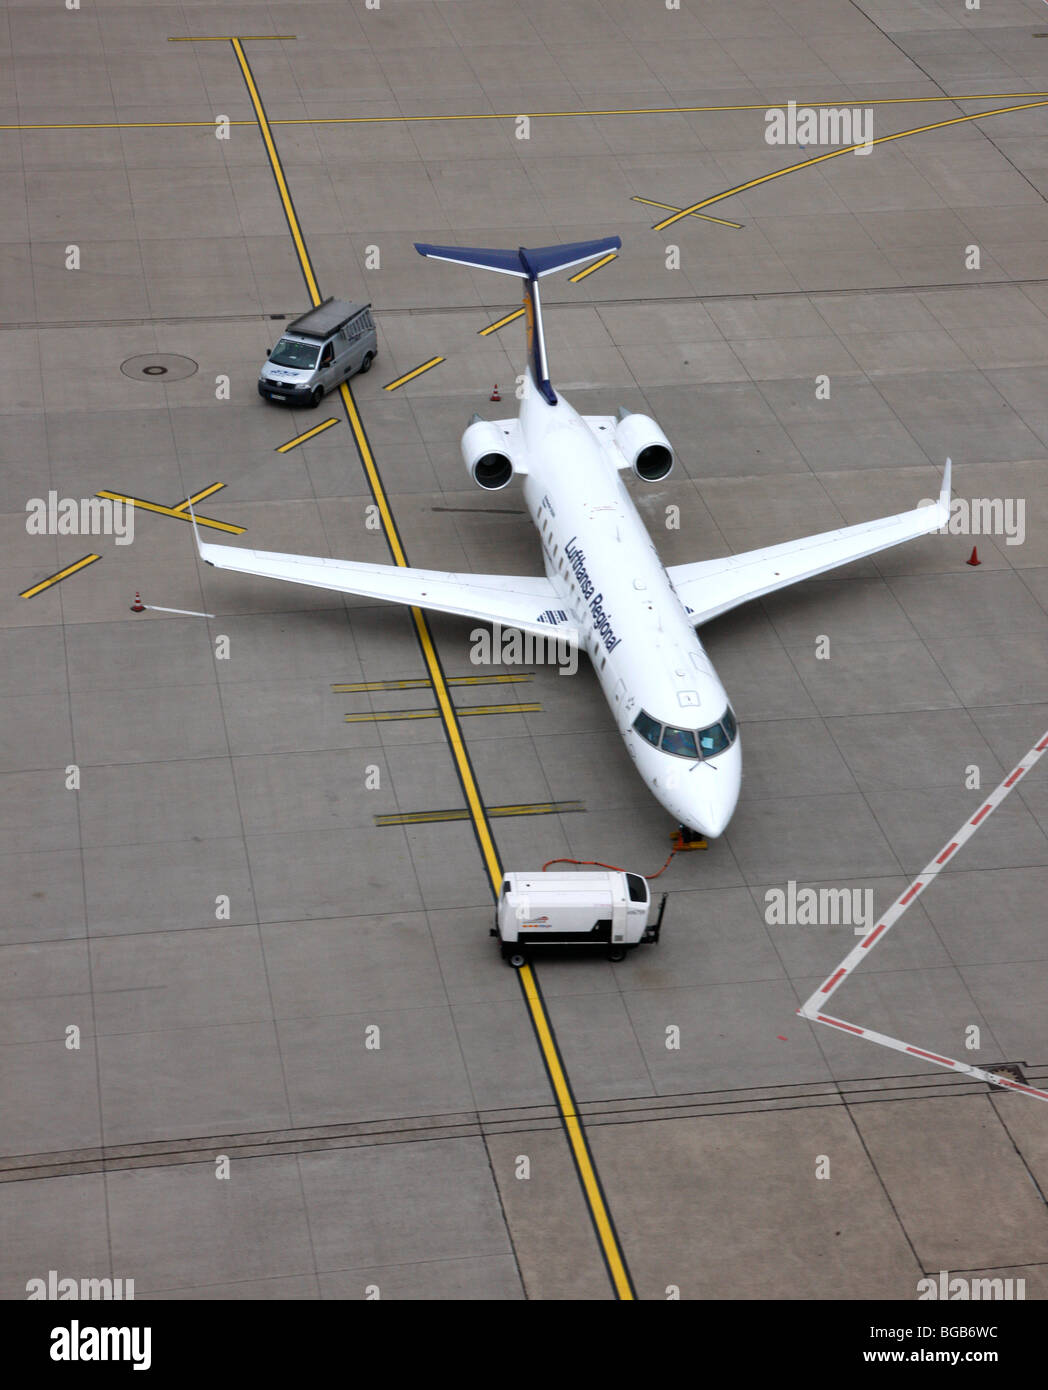 Plane on an airport taxi way, waiting for passengers. Stock Photo